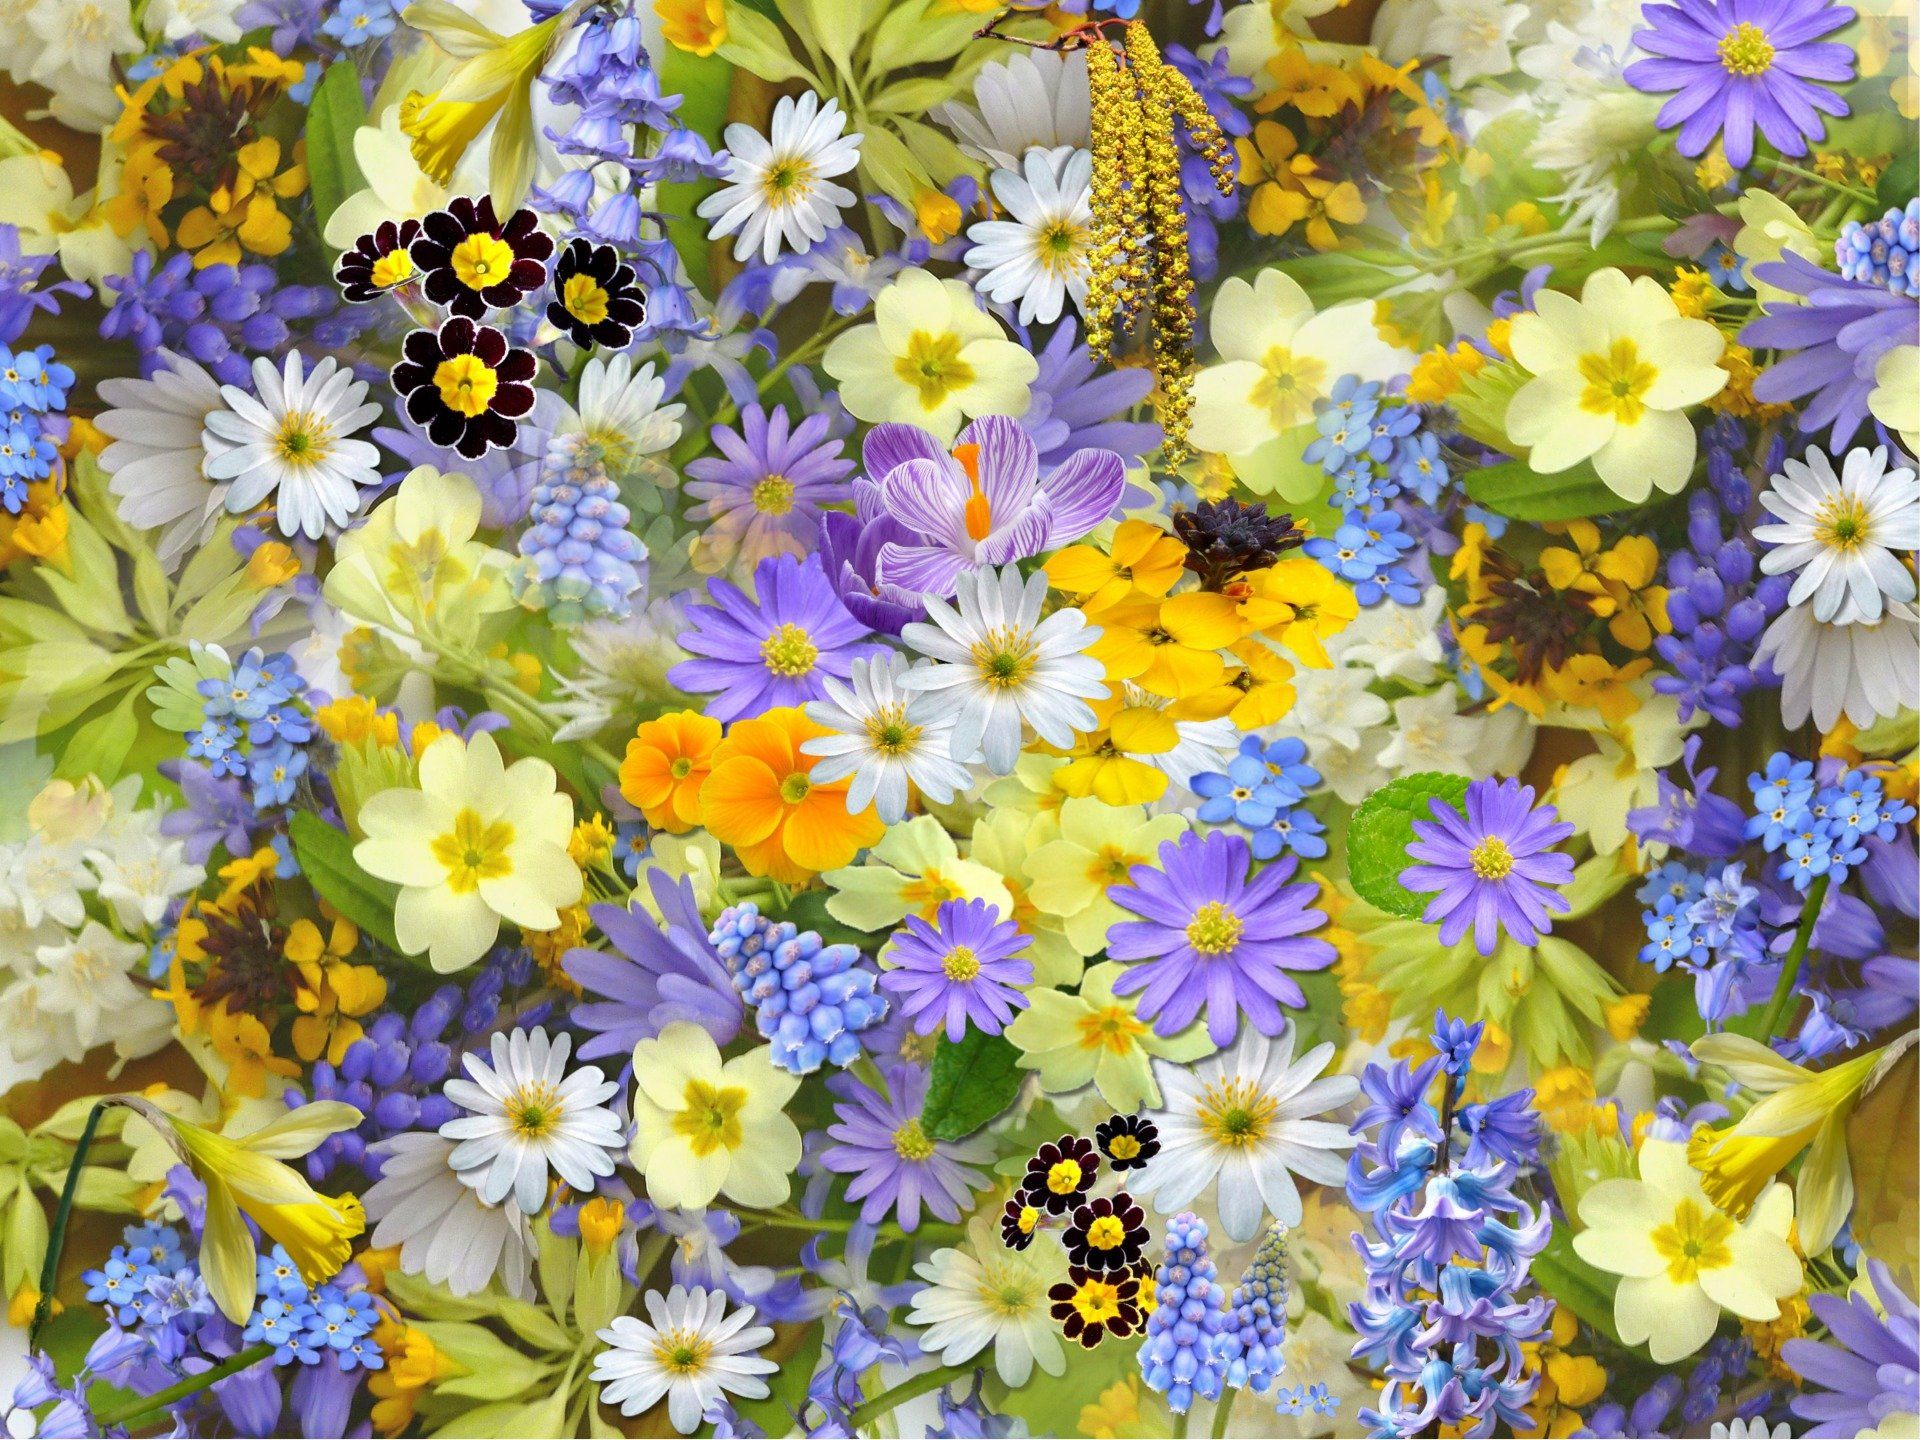 Spring-themed array of flowers